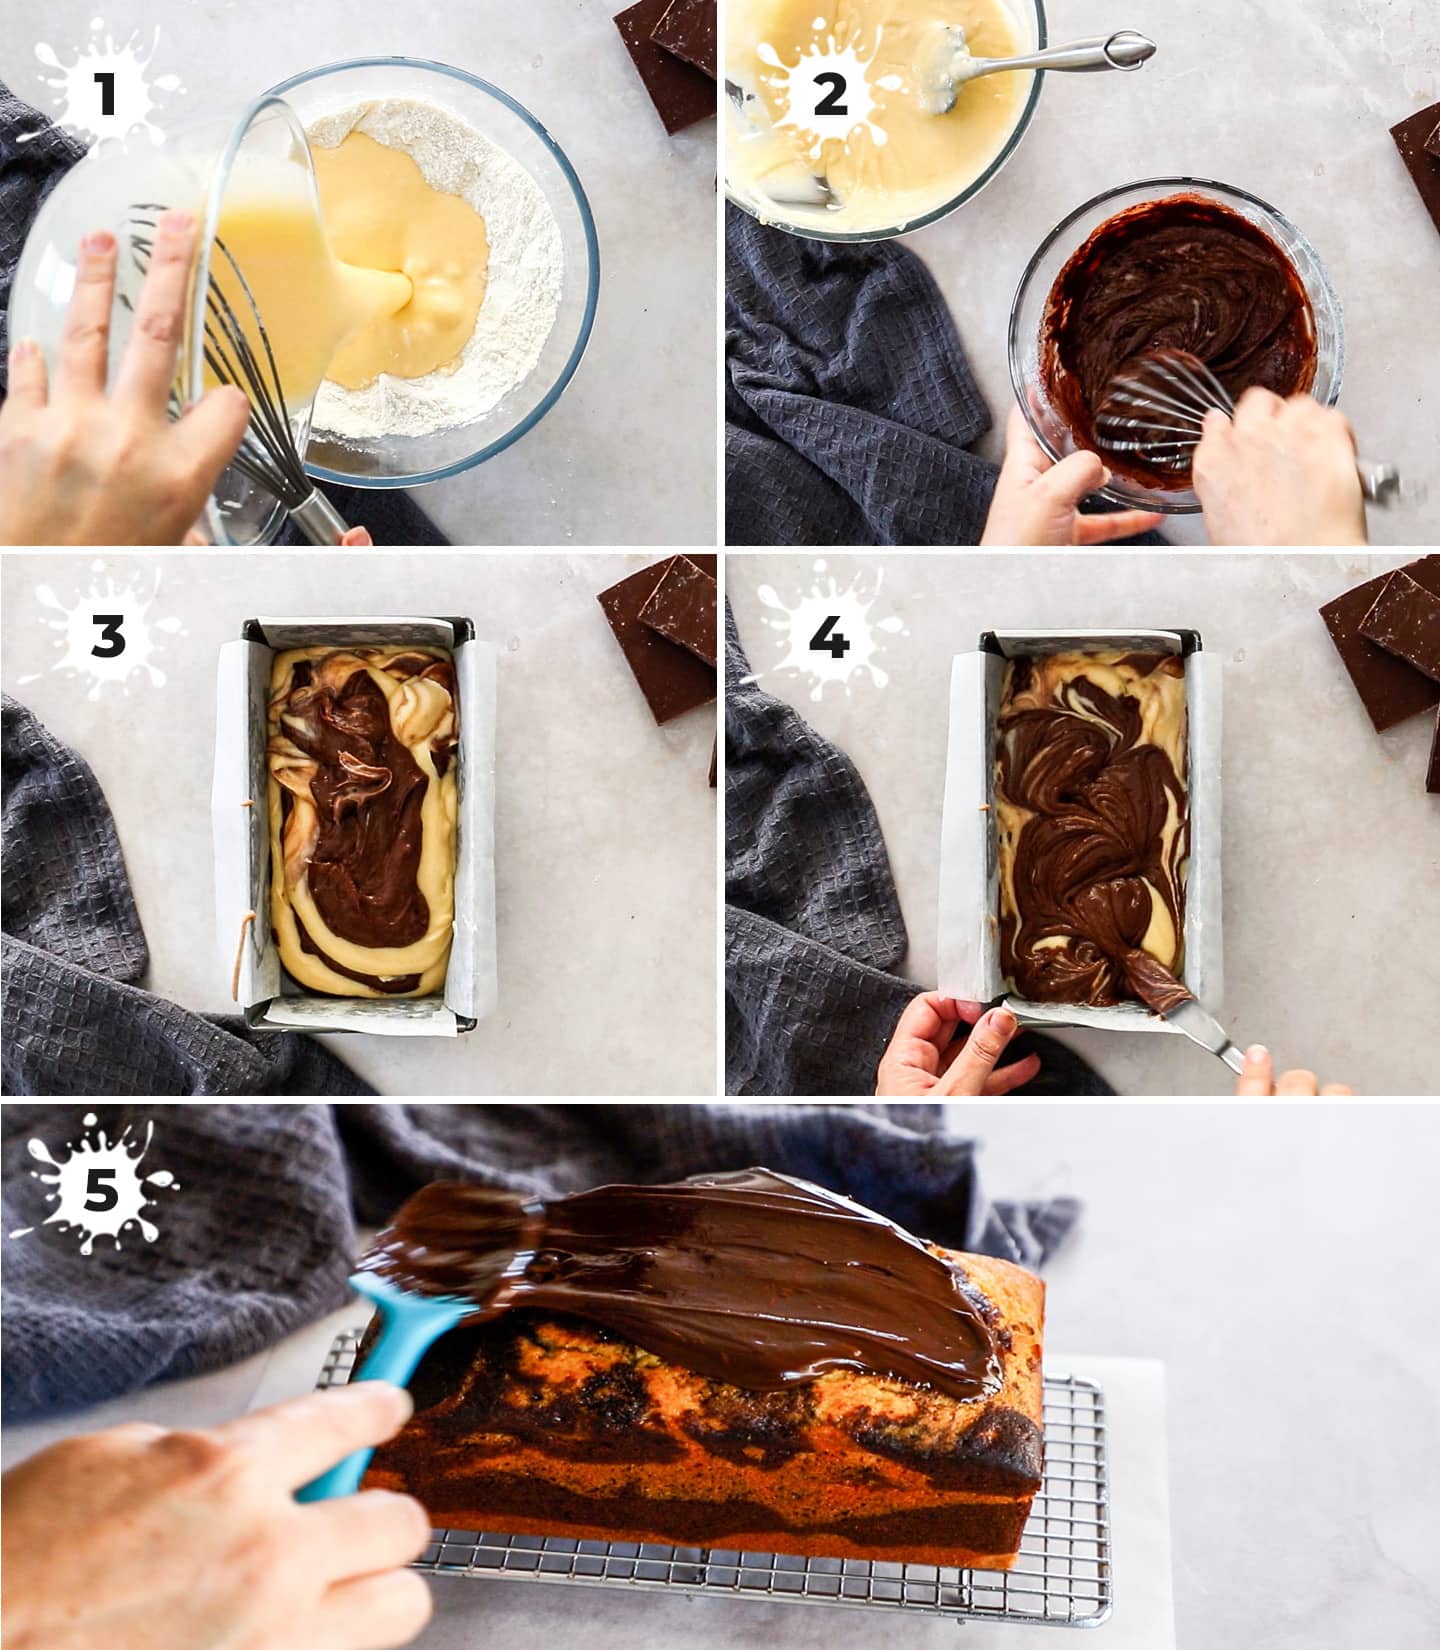 A collage of 5 images showing how to make marble cake.